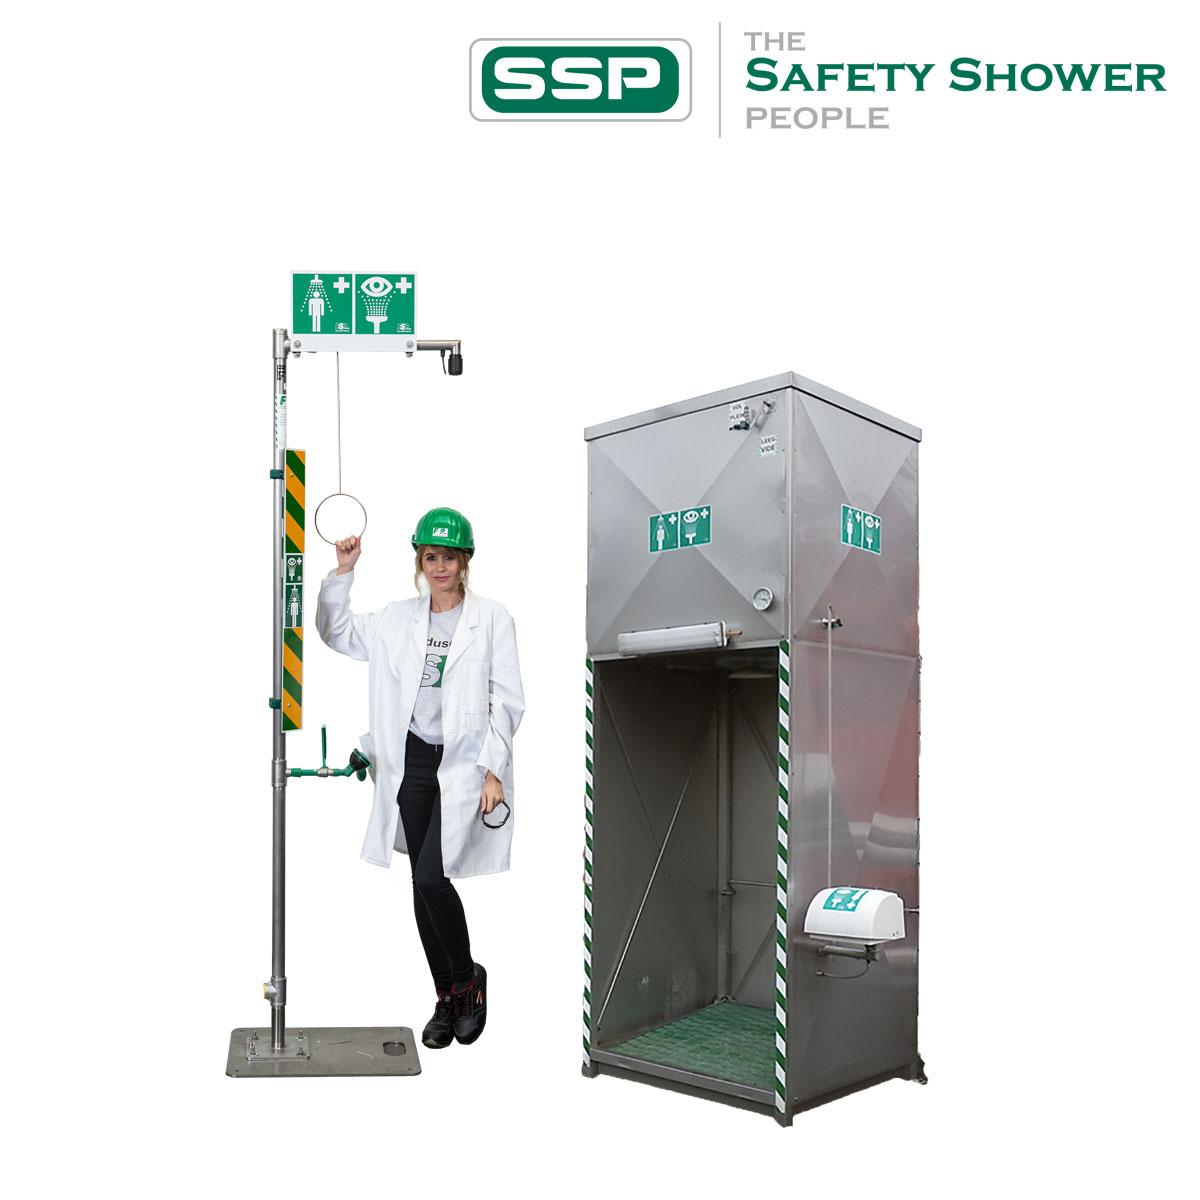 Safety Shower People Promo